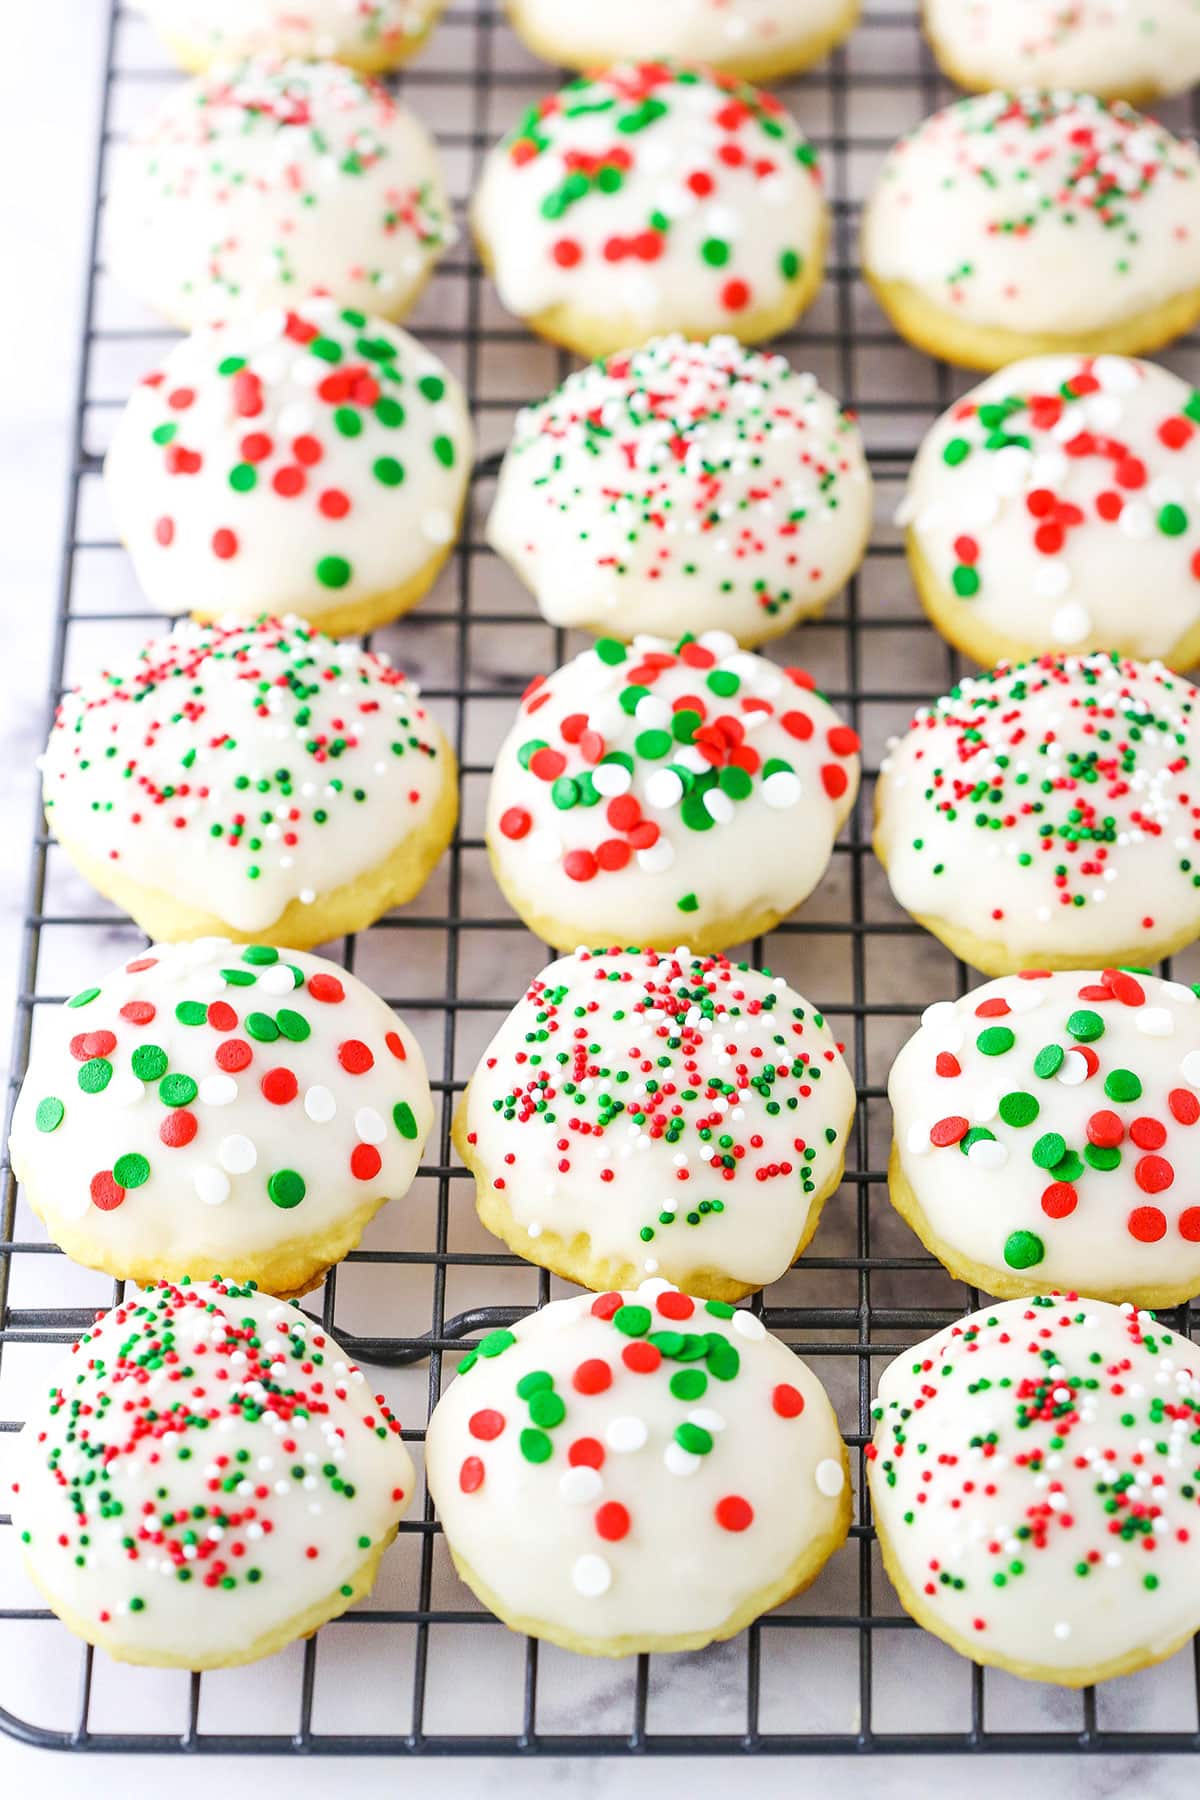 Italian Ricotta Cookies with red, green and white sprinkles spread over a metal cooling rack